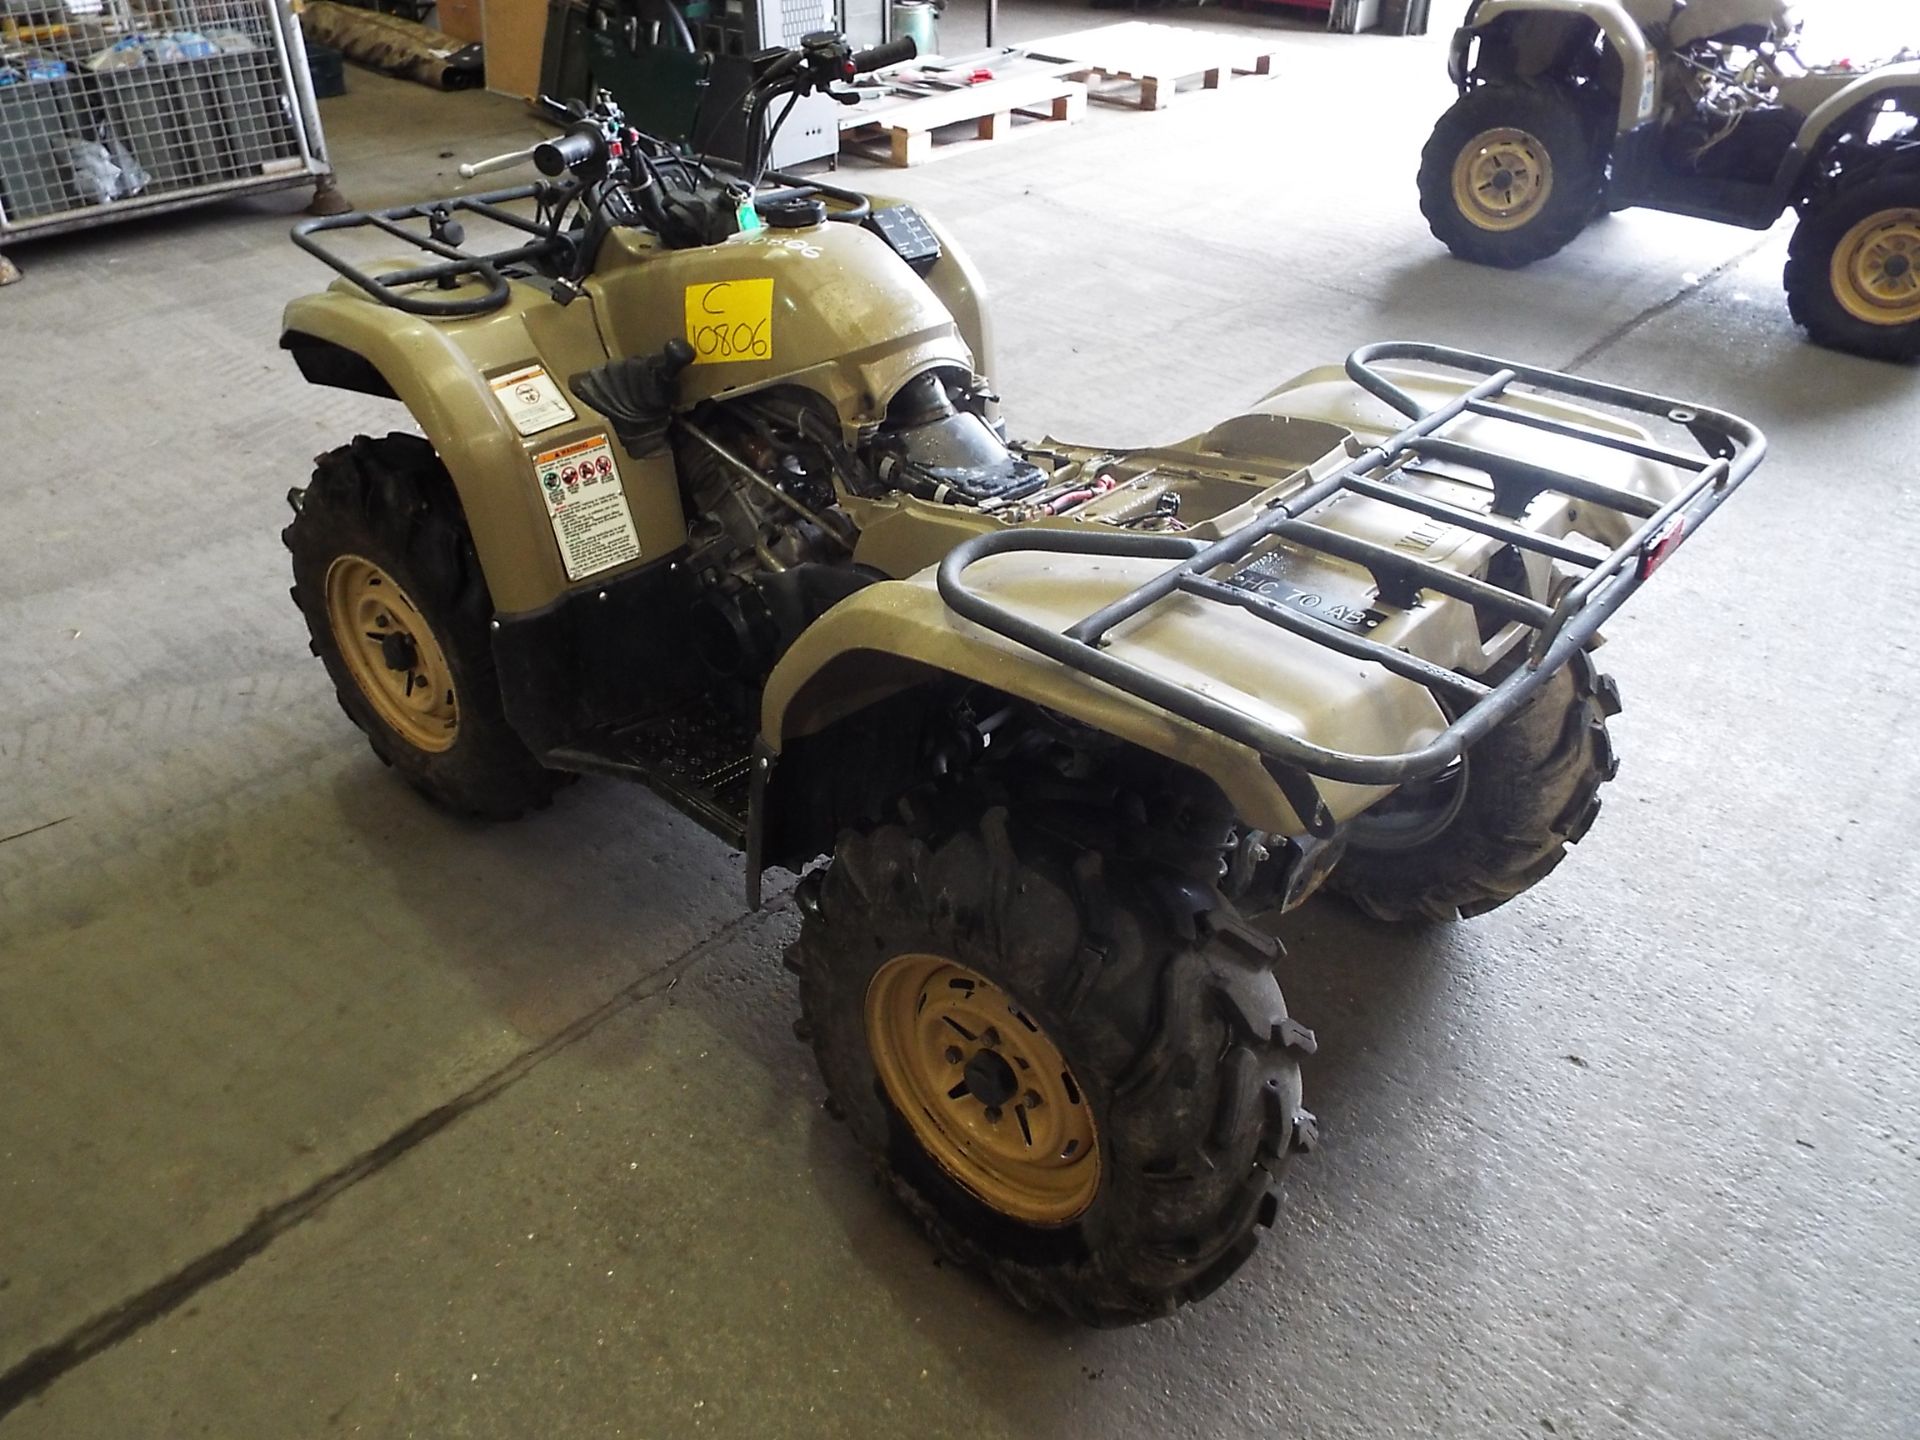 Military Specification Yamaha Grizzly 450 4 x 4 ATV Quad Bike Complete with Winch - Image 5 of 18